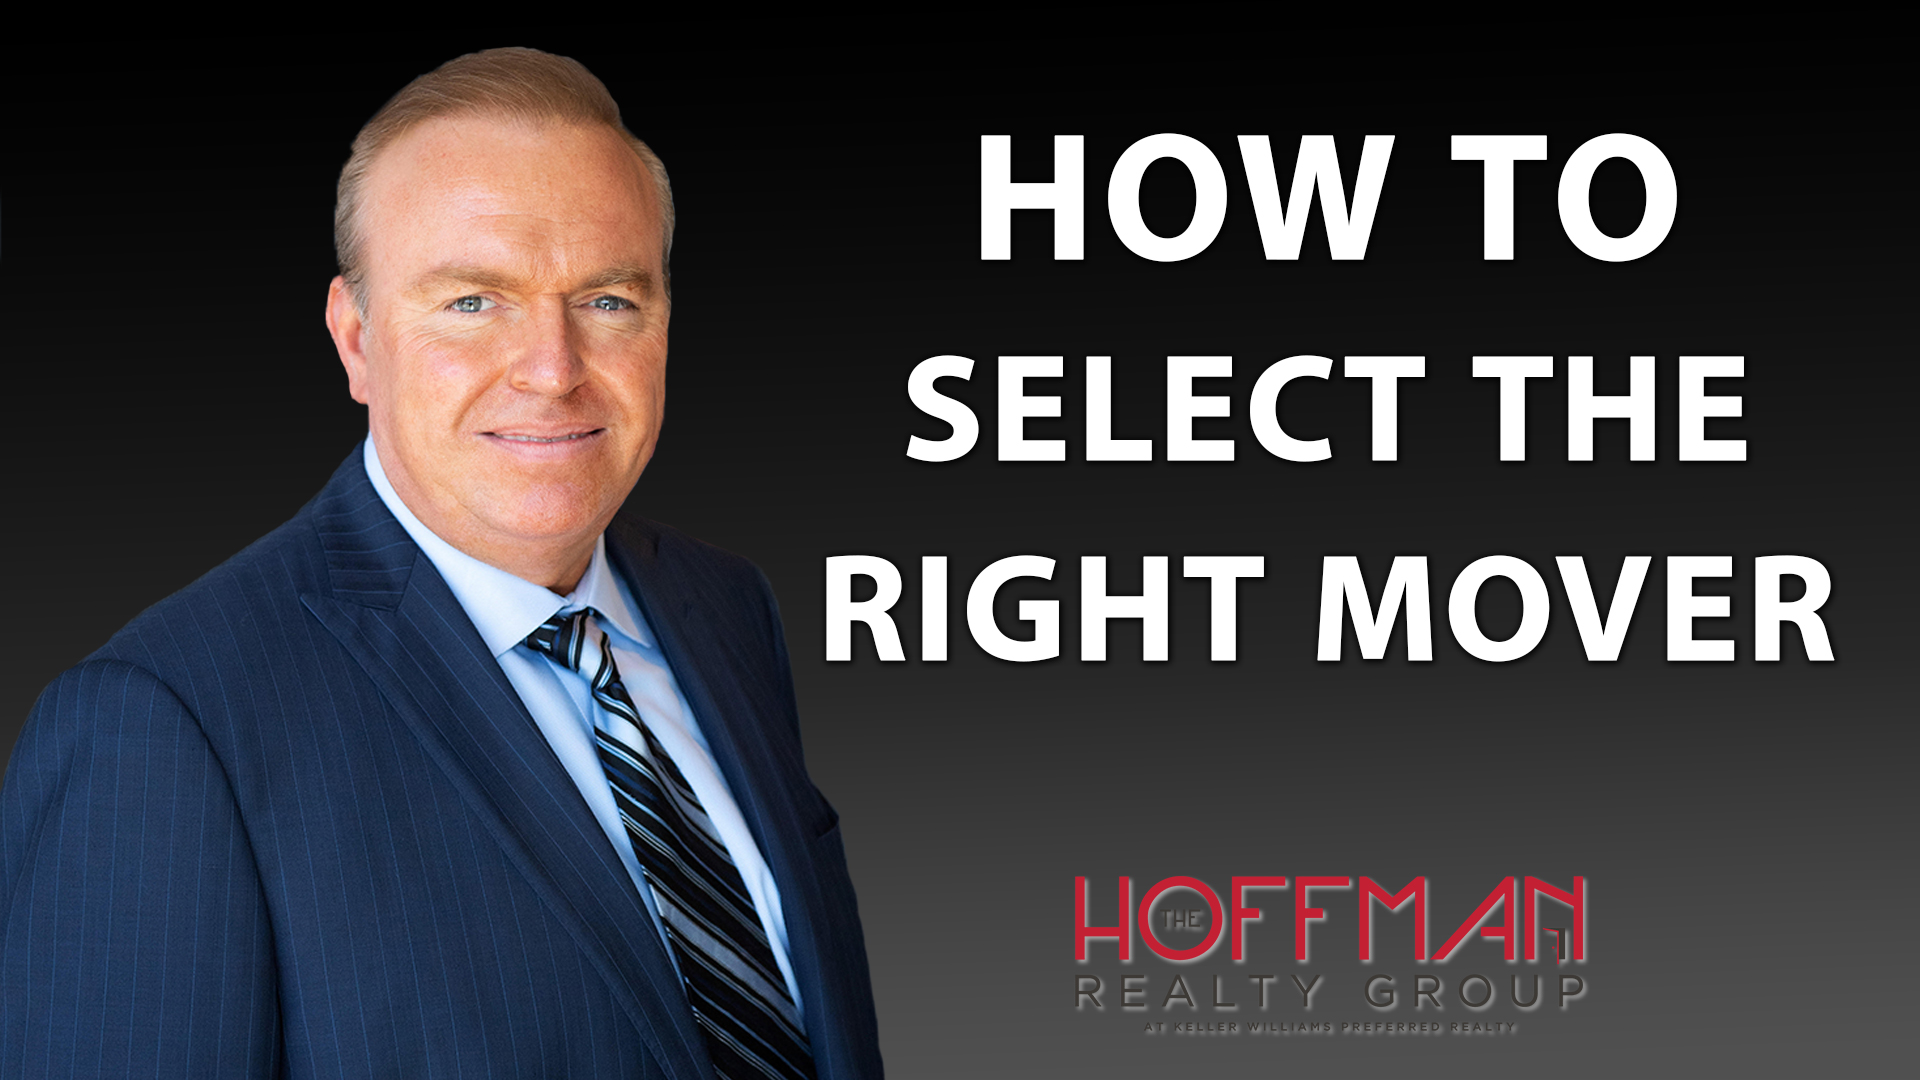 7 Tips for Selecting the Right Mover